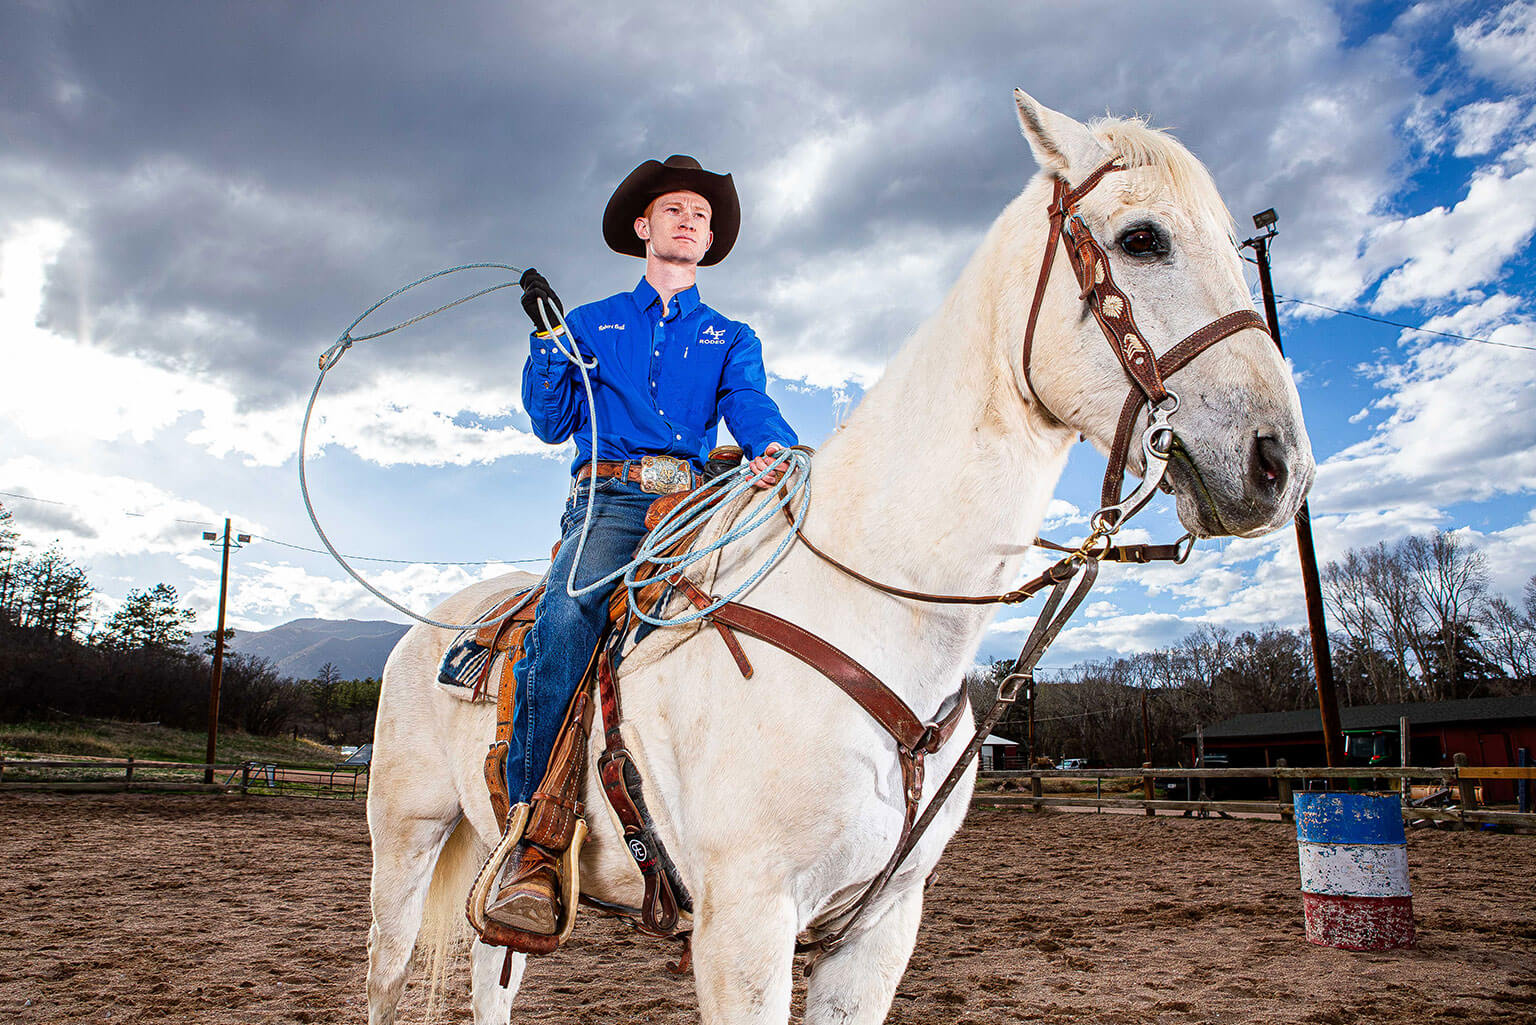 Cadet 1st Class Robert Ball rides his horse Ferg in the U.S. Air Force Academy Rodeo Club arena.